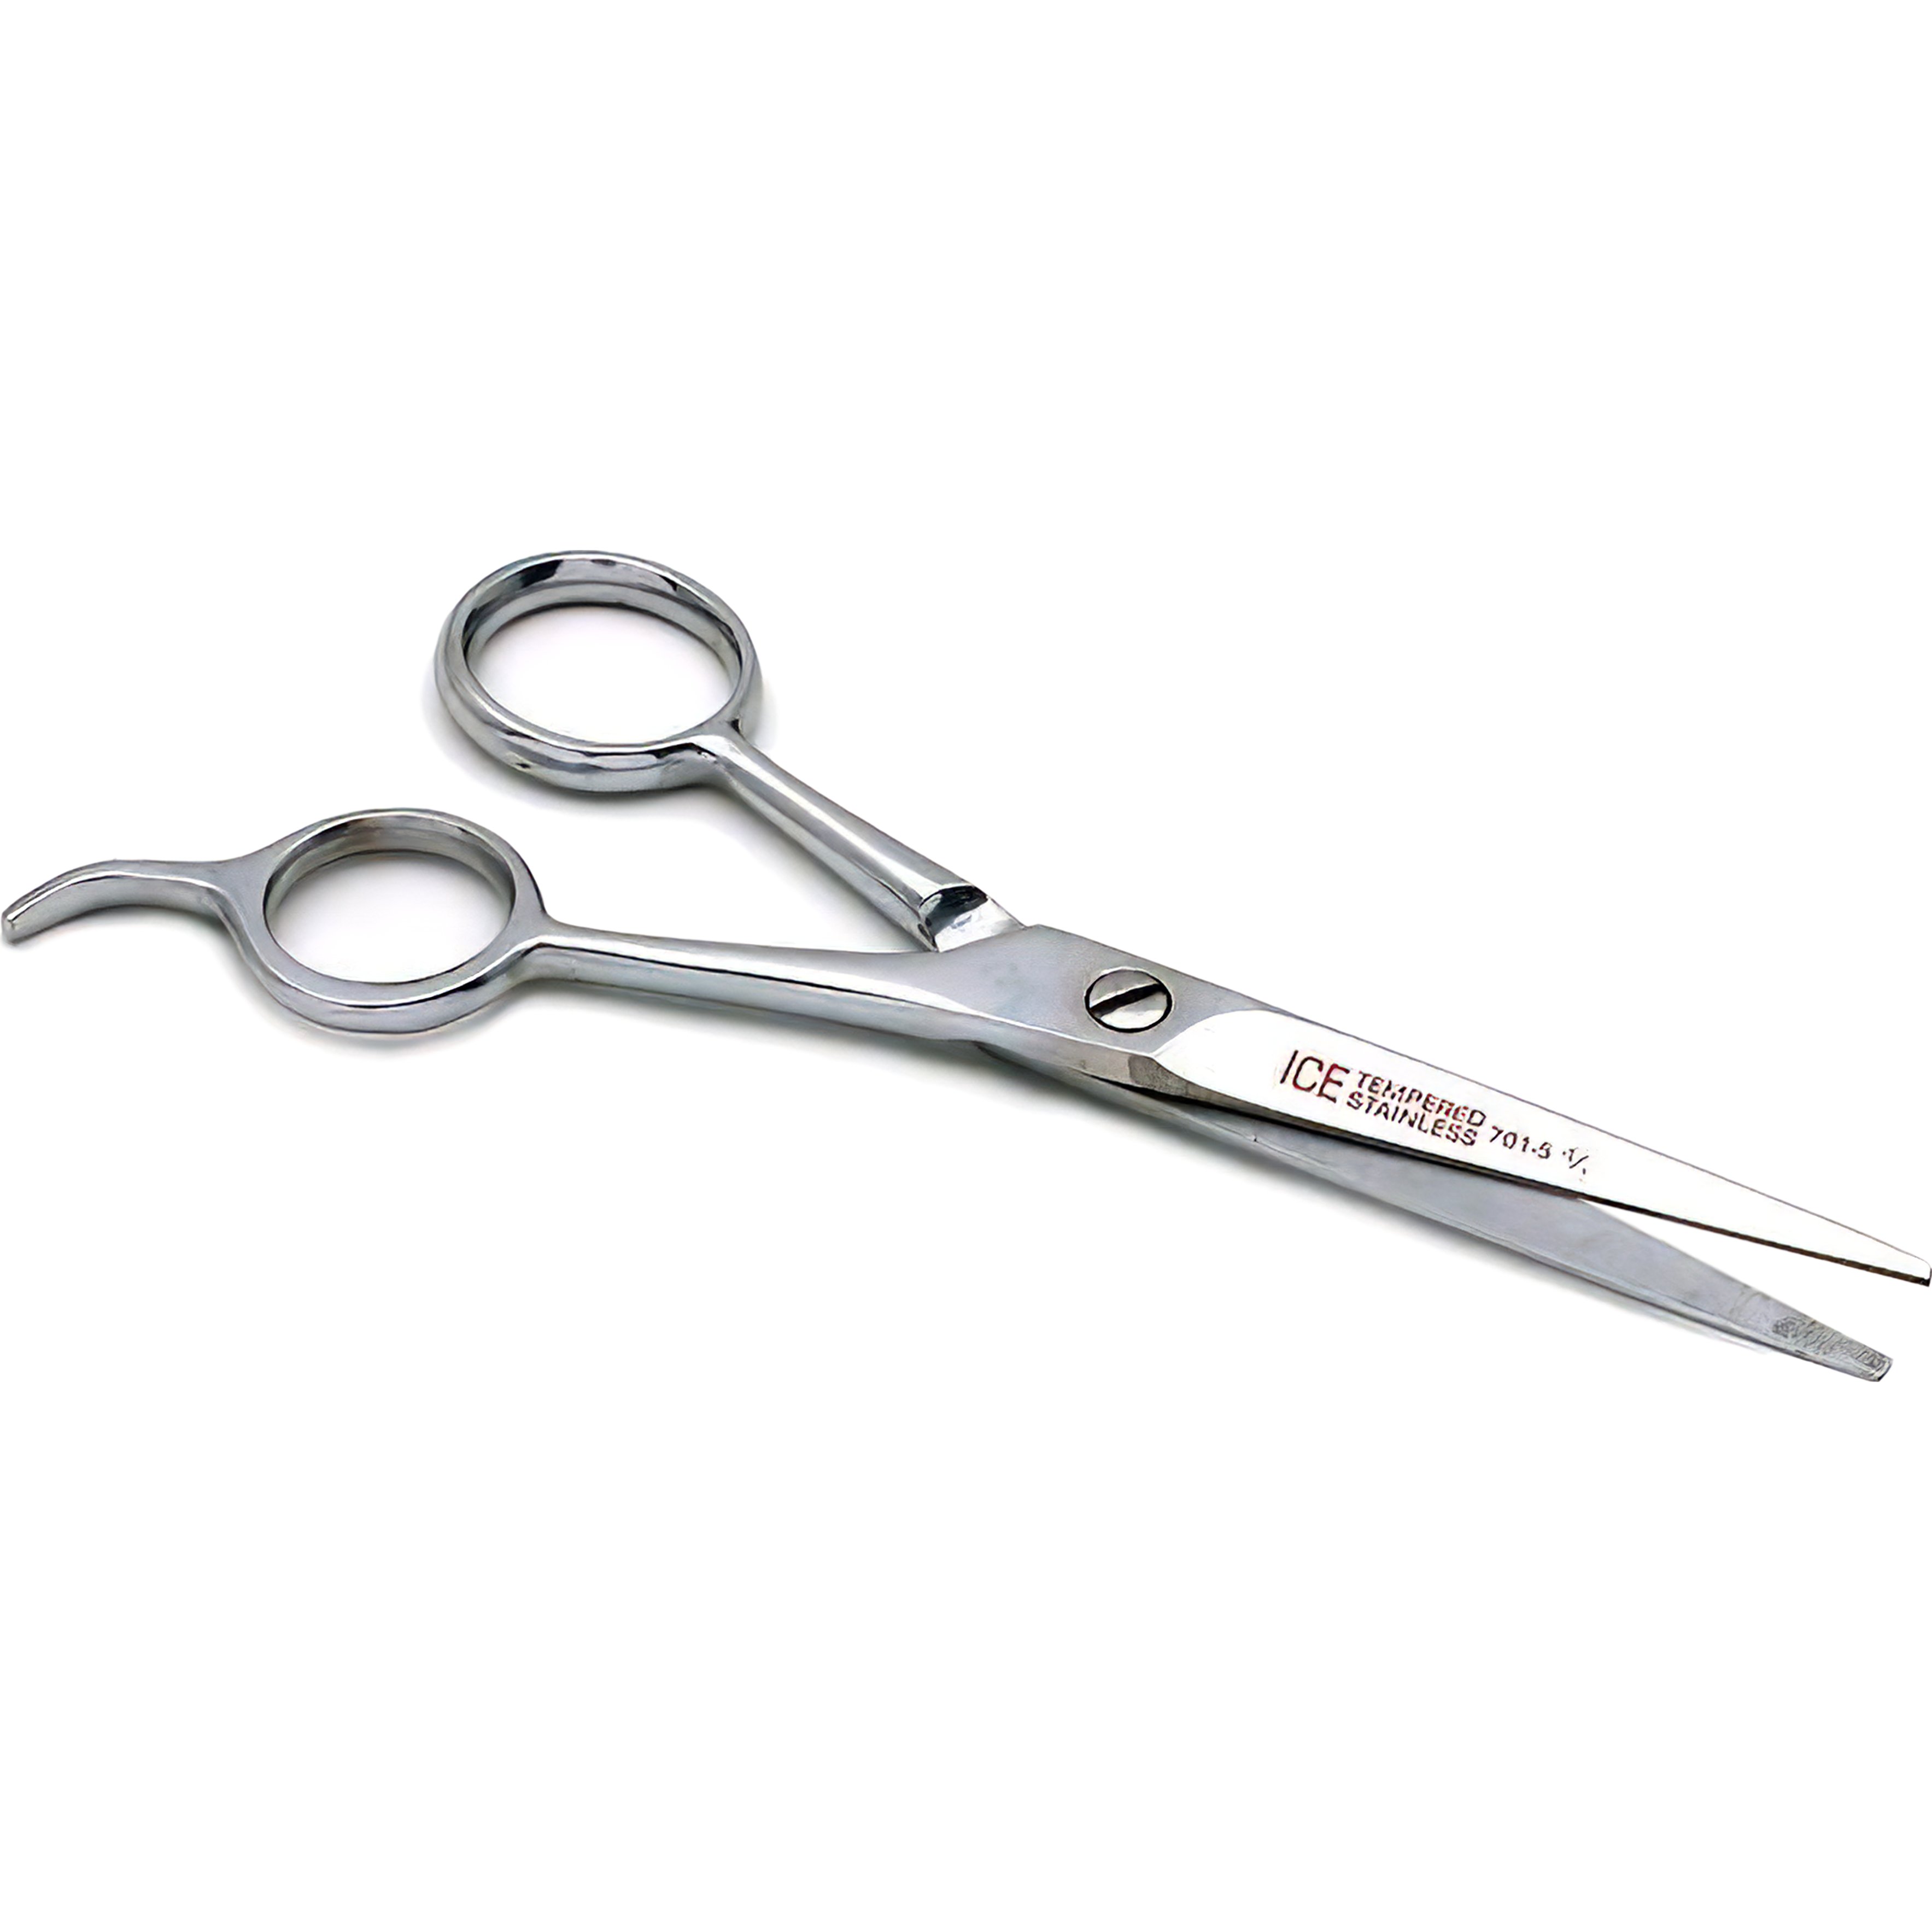 Findingking Hair Cutting Scissors 5.5" Ice Tempered